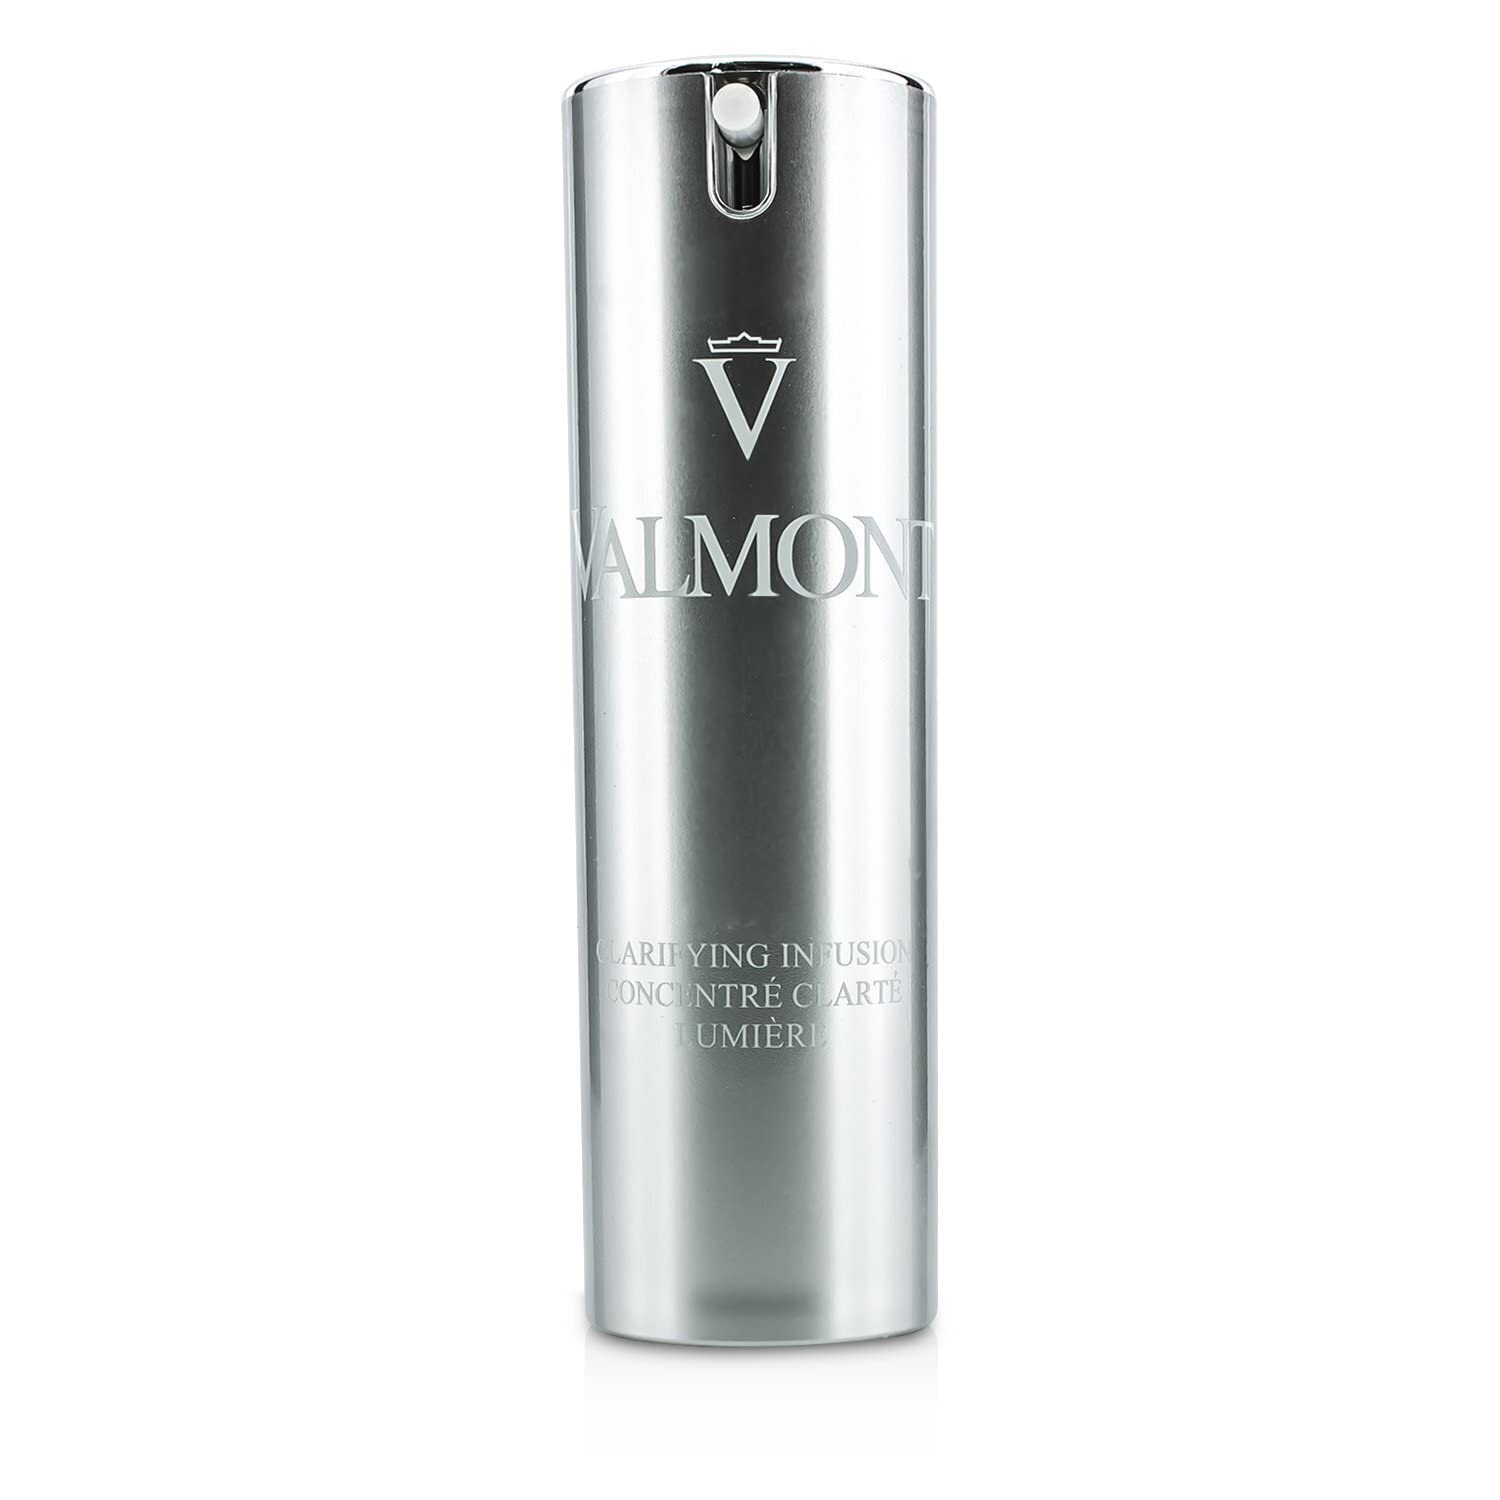 Valmont Expert Of Light Clarifying Infusion 30Ml